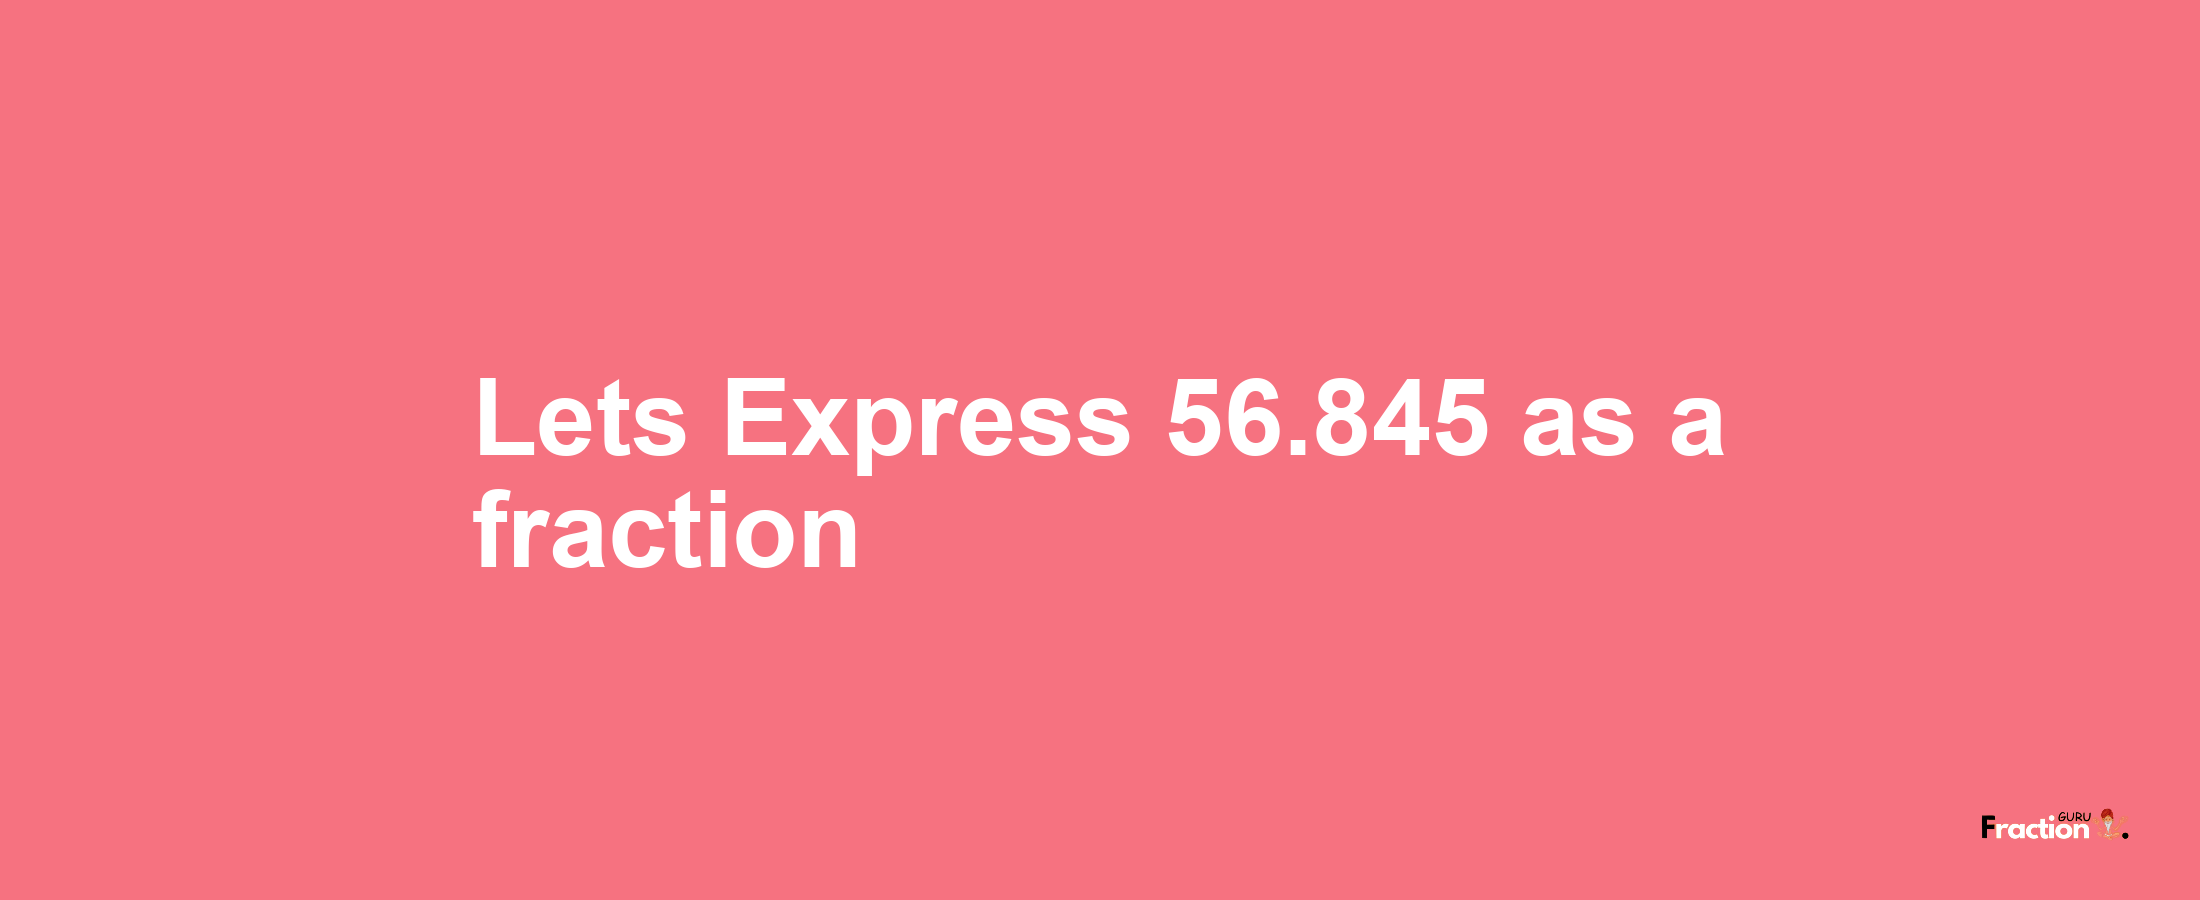 Lets Express 56.845 as afraction